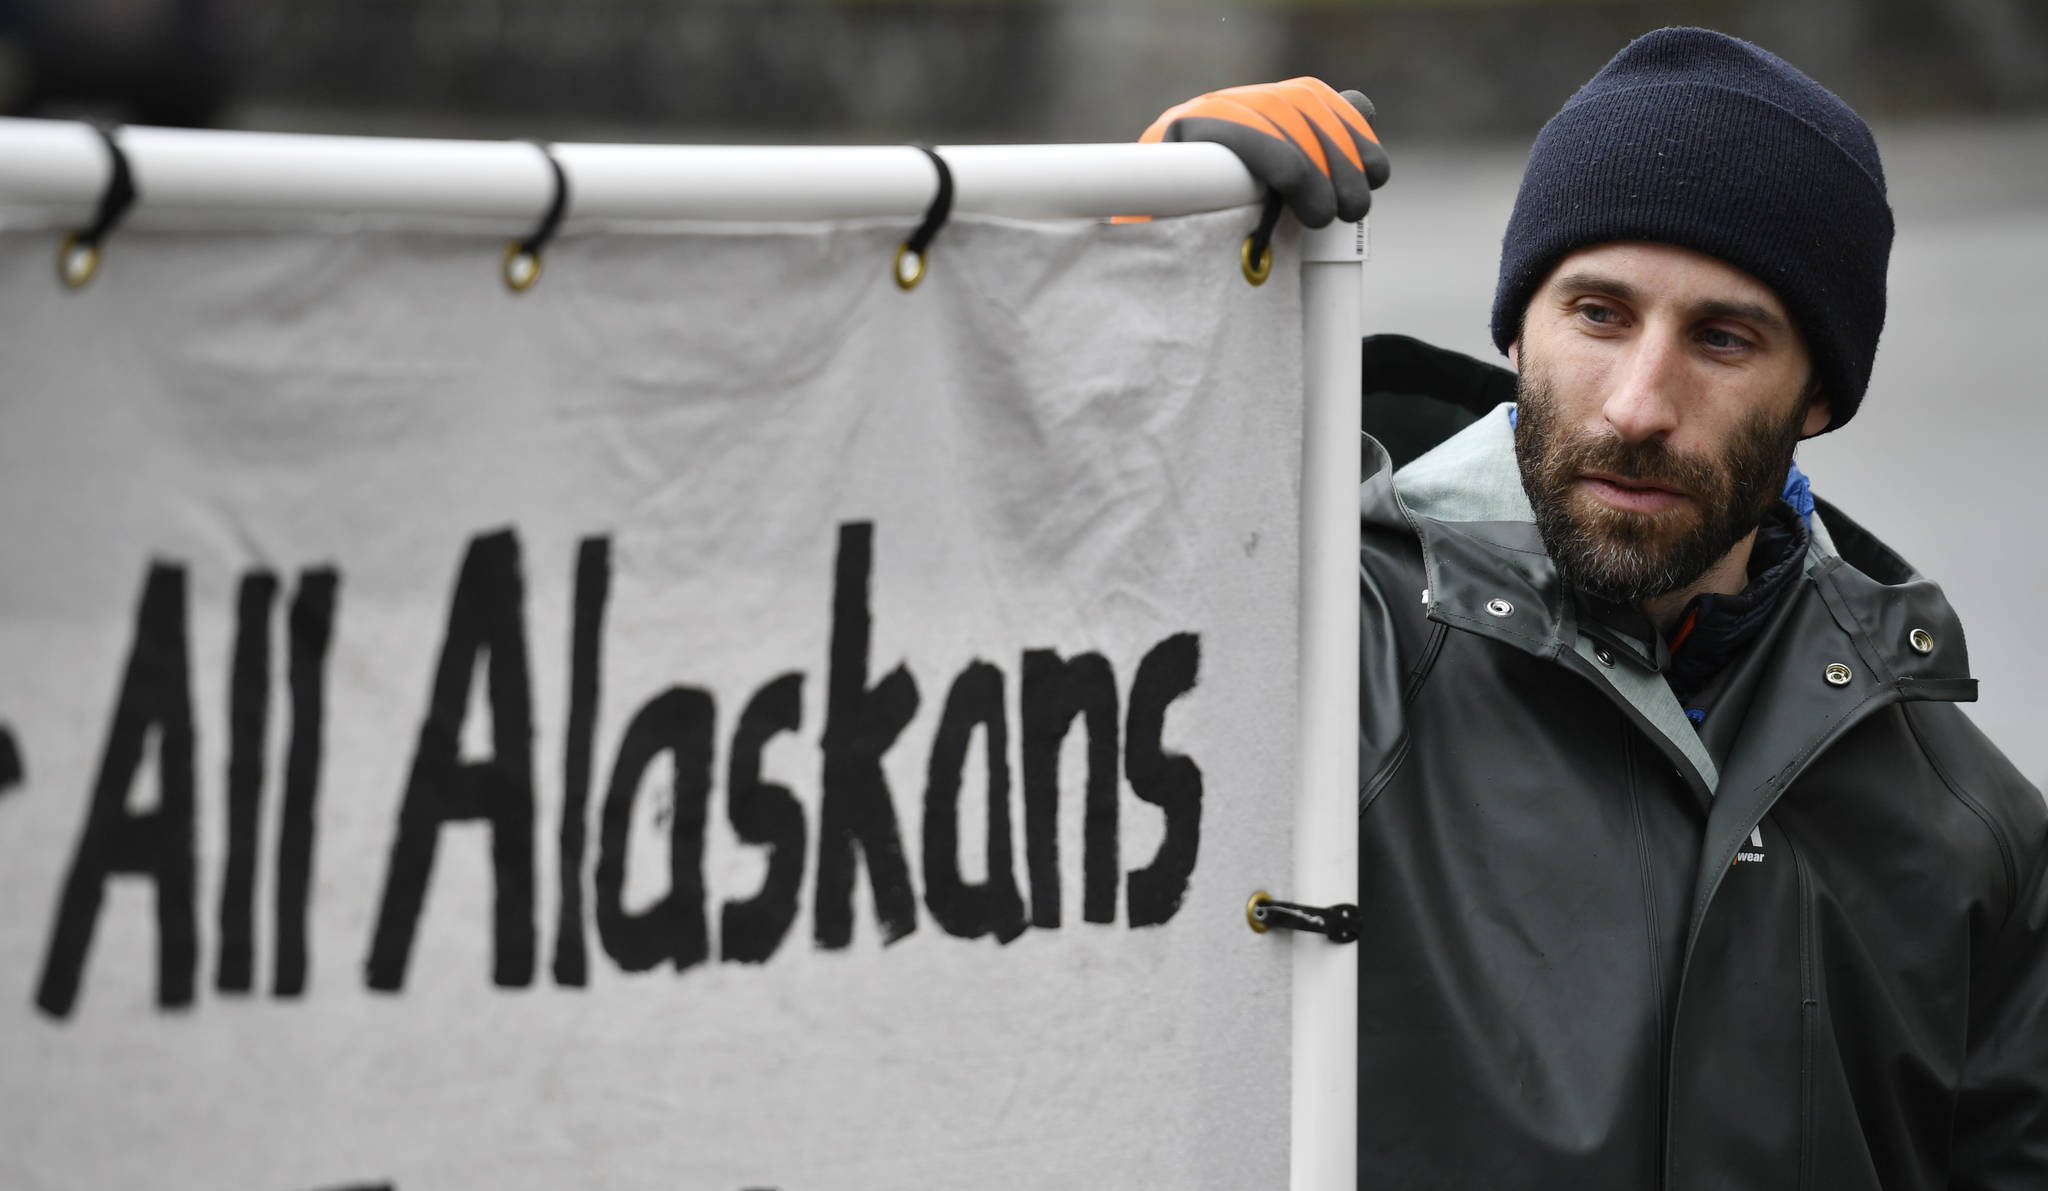 Dan DeSloover holds up his protest sign across from the Capitol on Friday, April 19, 2019. (Michael Penn | Juneau Empire)